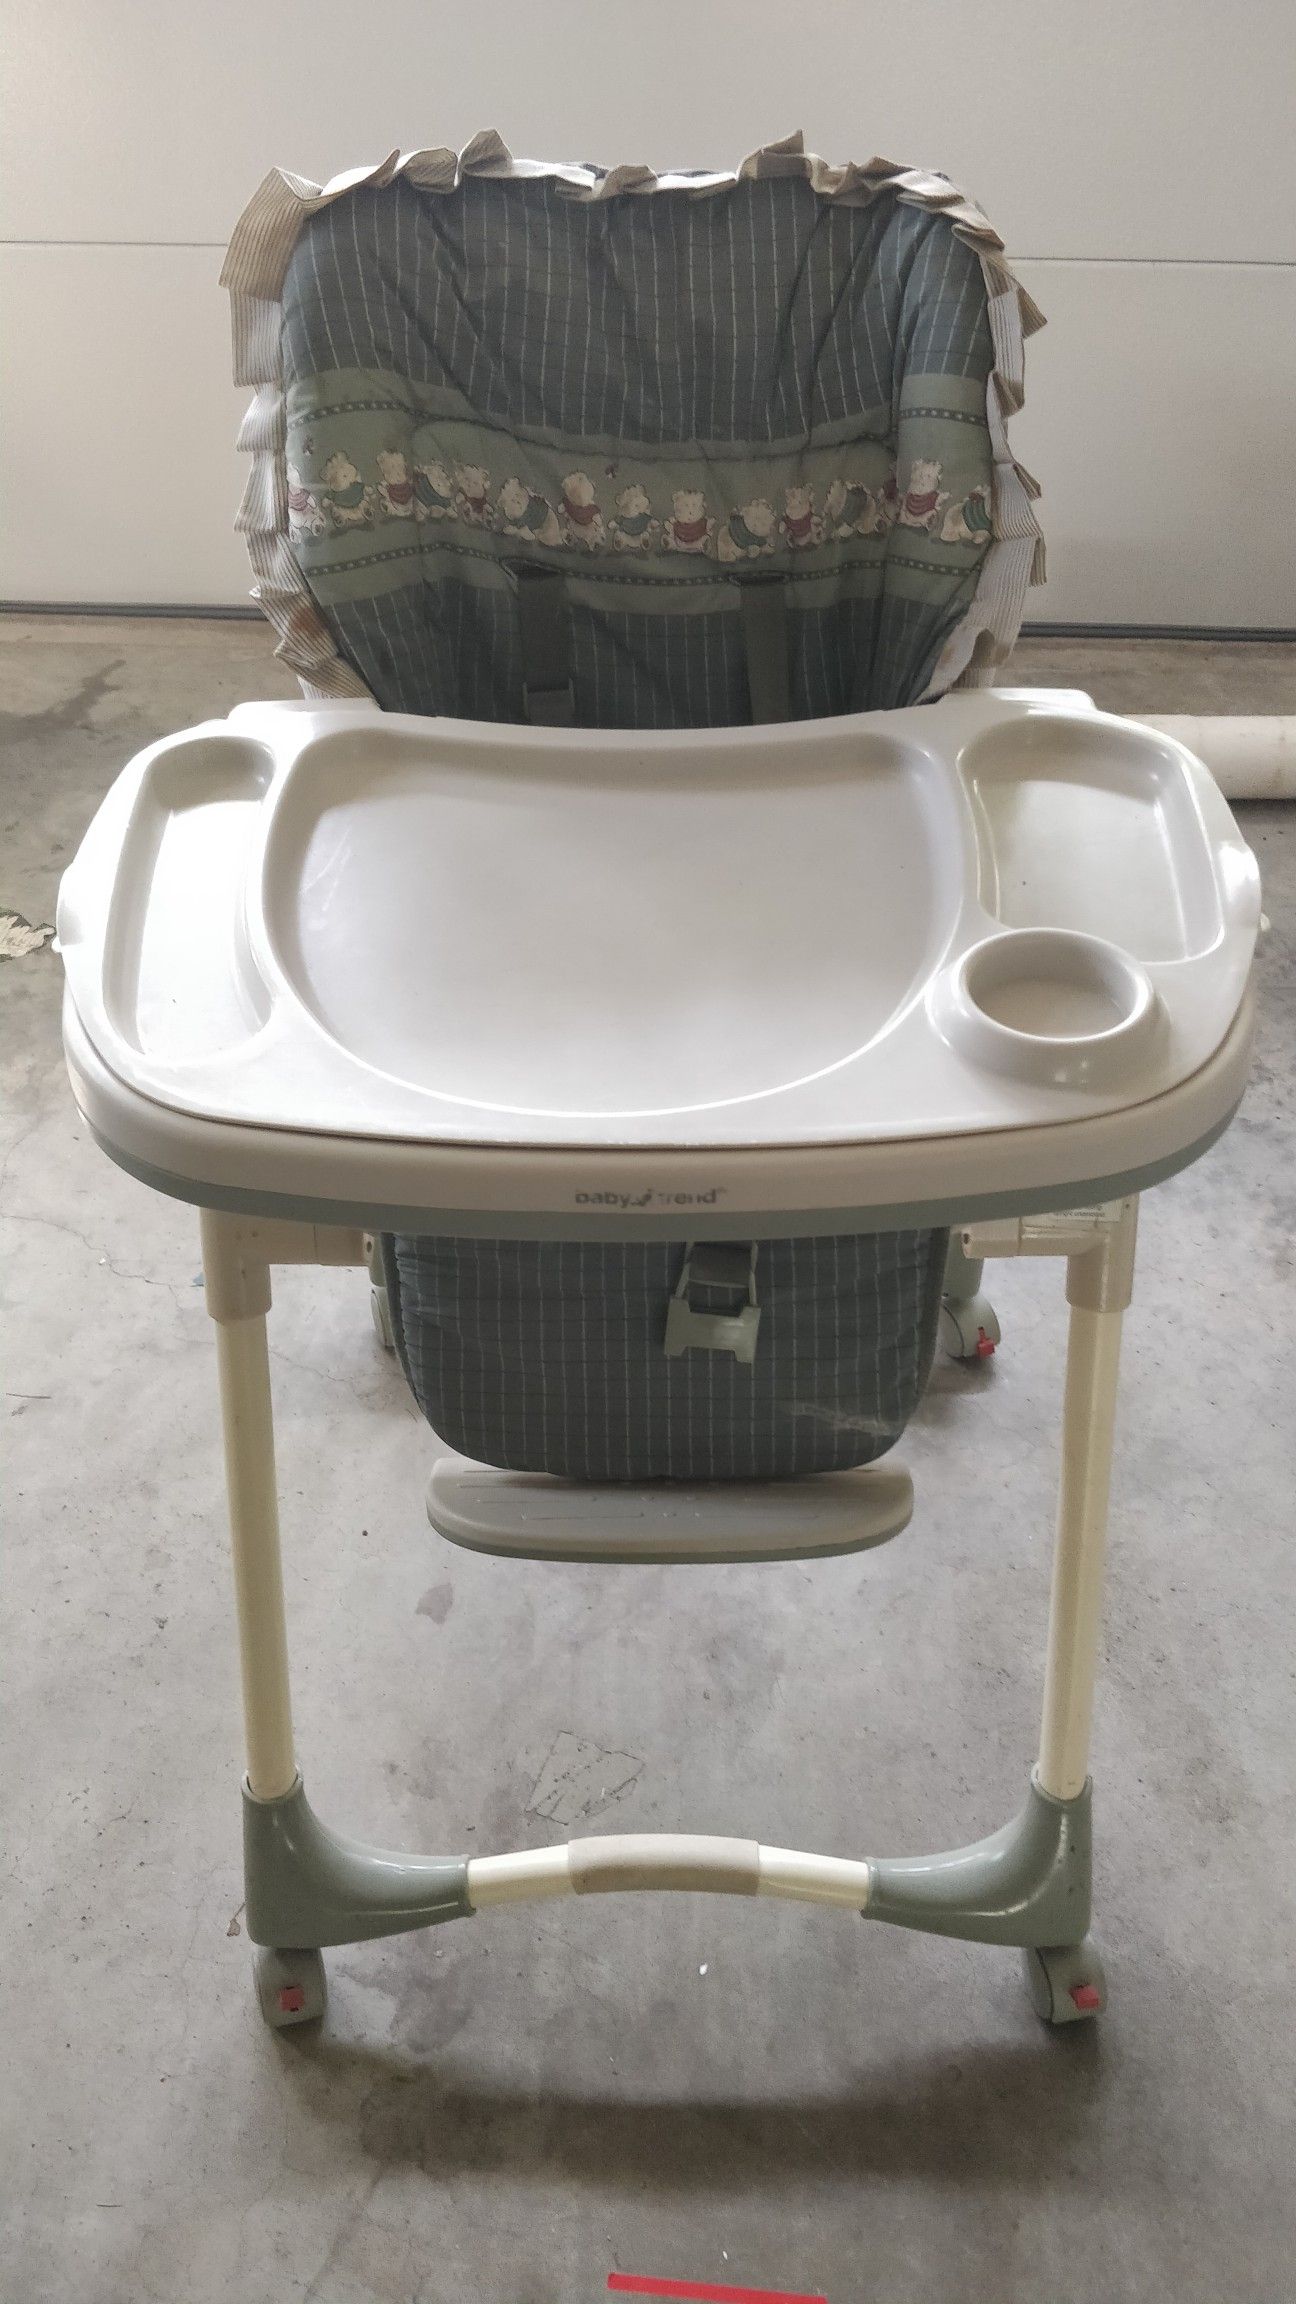 High chair. Tray is removable. Top of tray is also removable for easy cleaning. Back reclines to several positions.